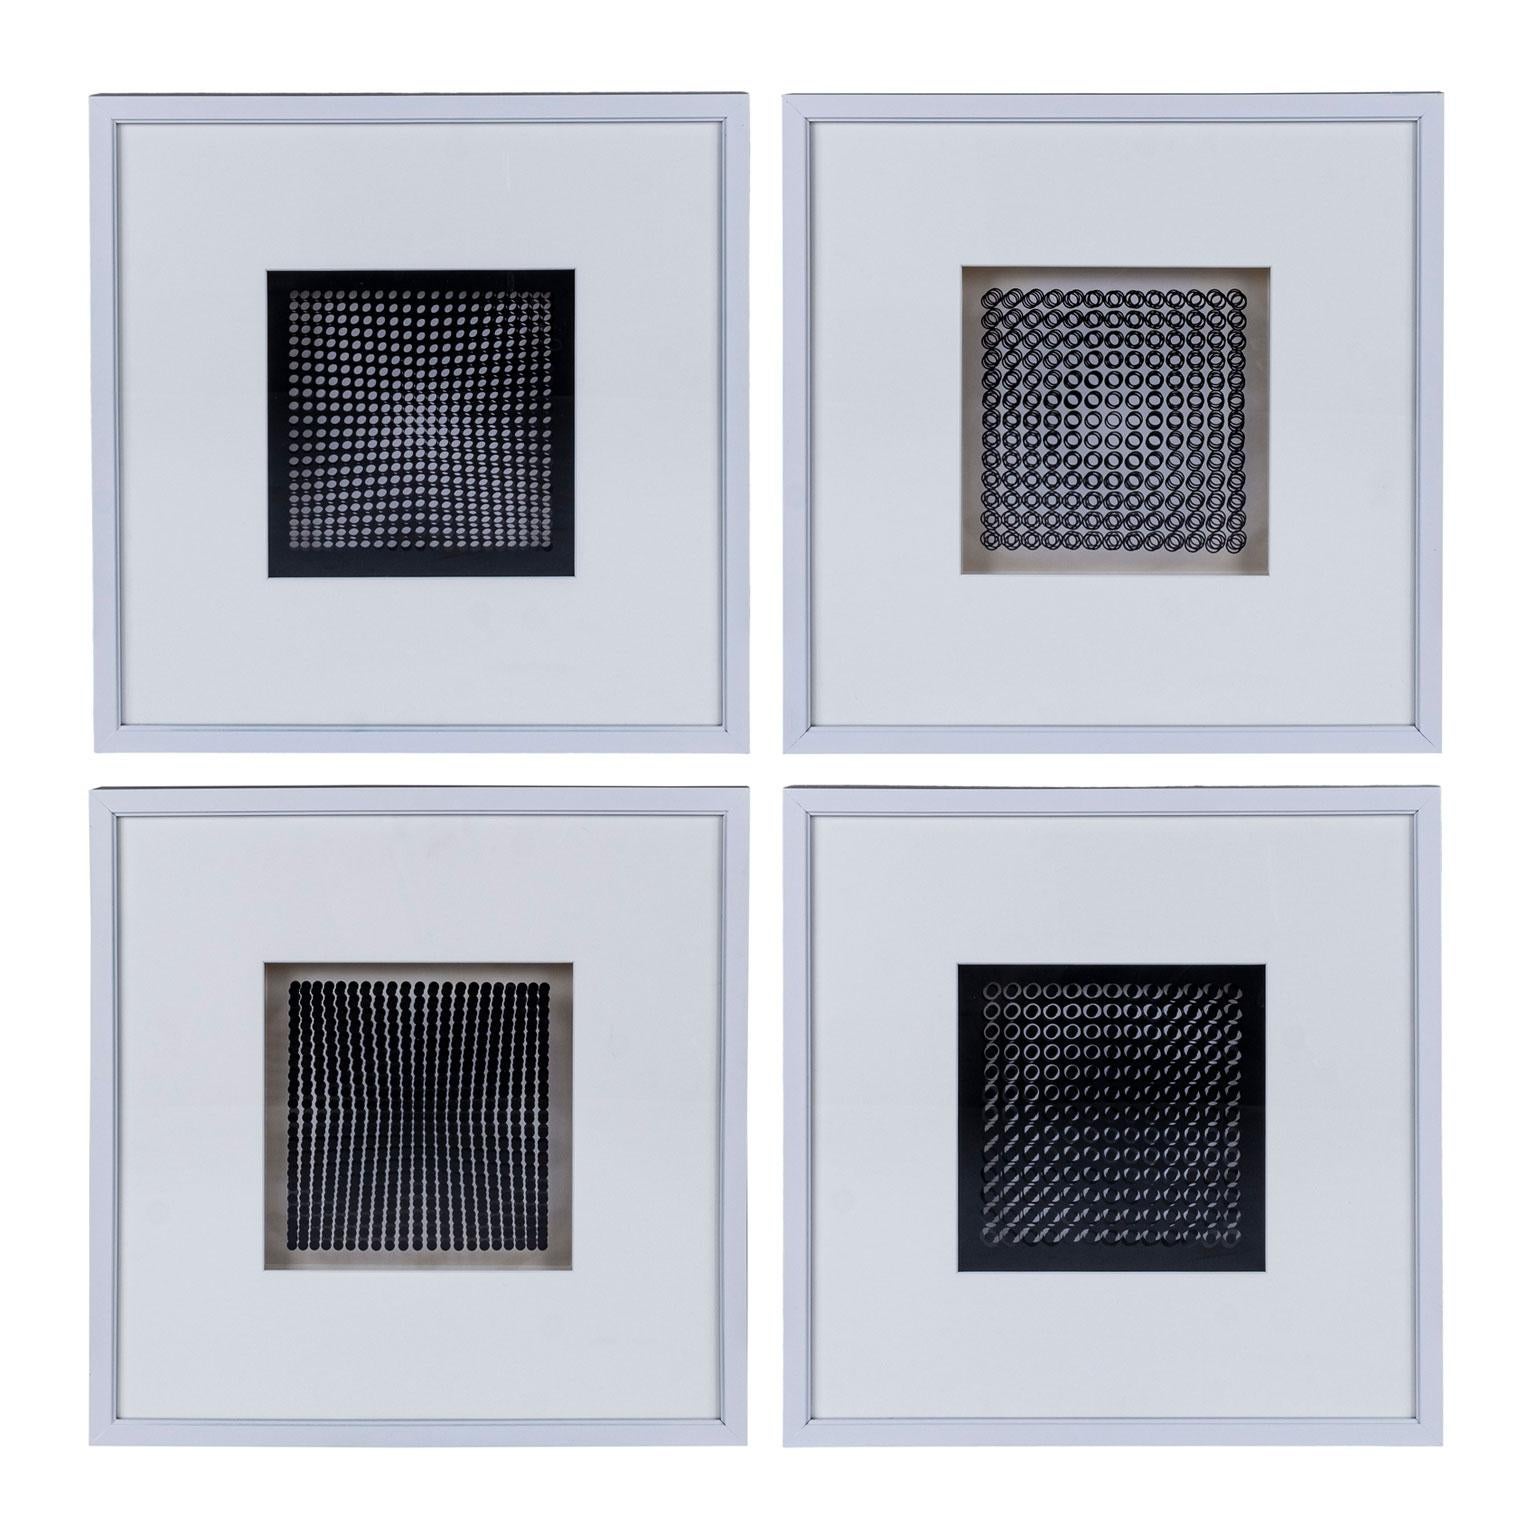 Hand-Crafted Four Vasarely Prints, Oeuvres Profondes